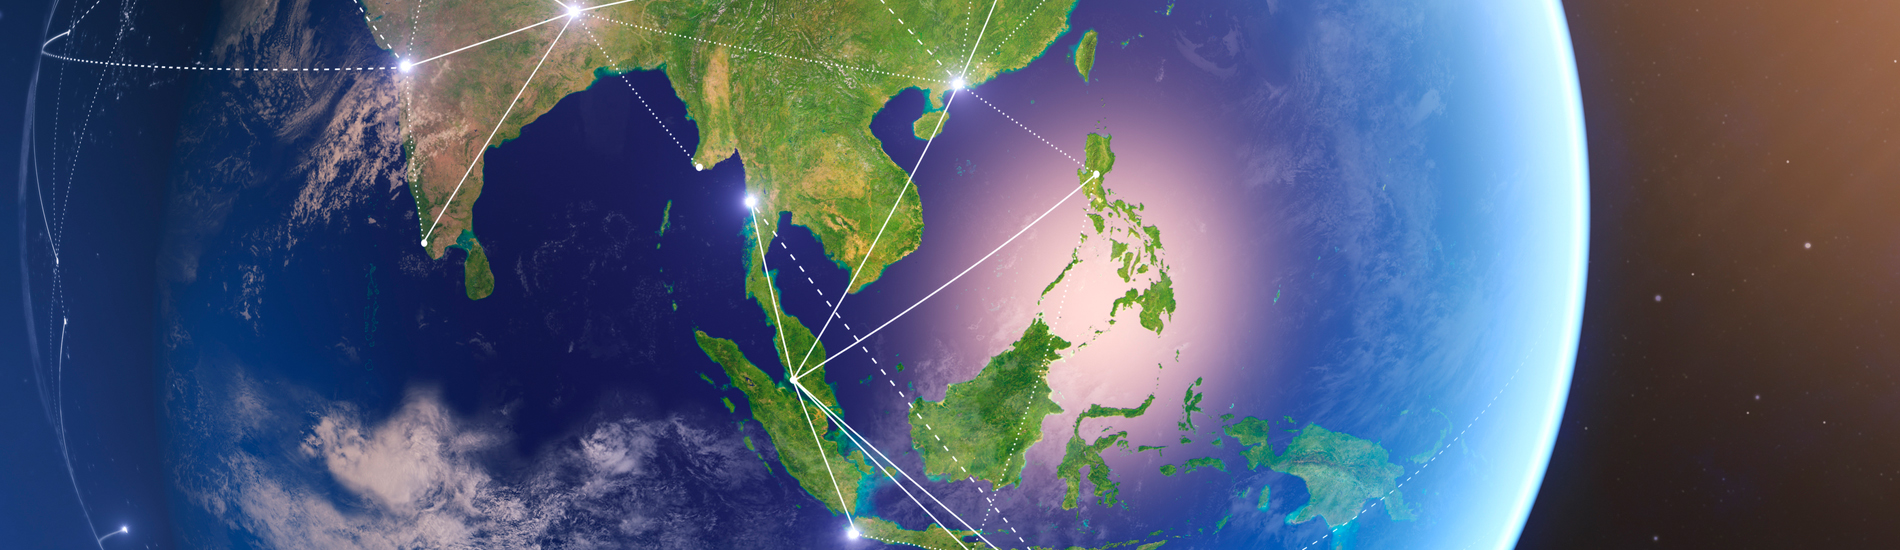 Thailand’s desire to become the digital innovation hub of ASEAN was championed by the NDESC in 2021